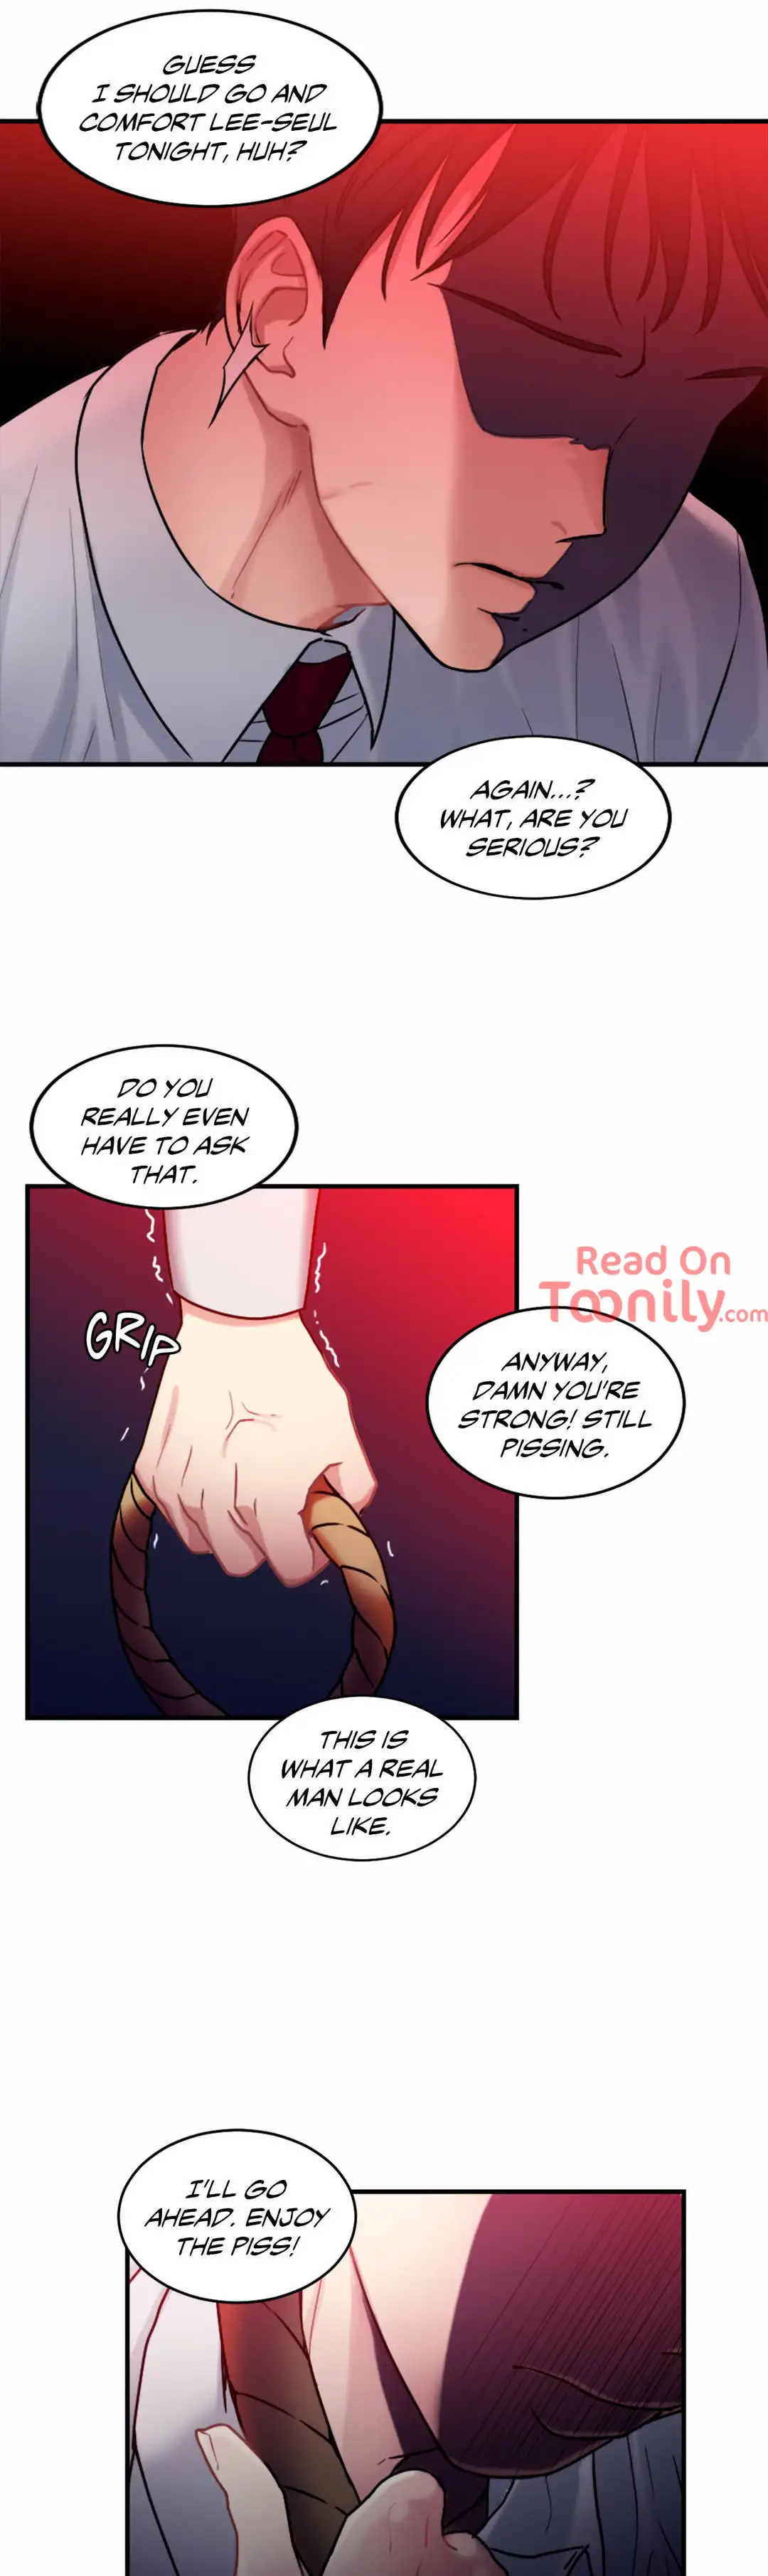 Tie Me Up! - Chapter 3 Page 36